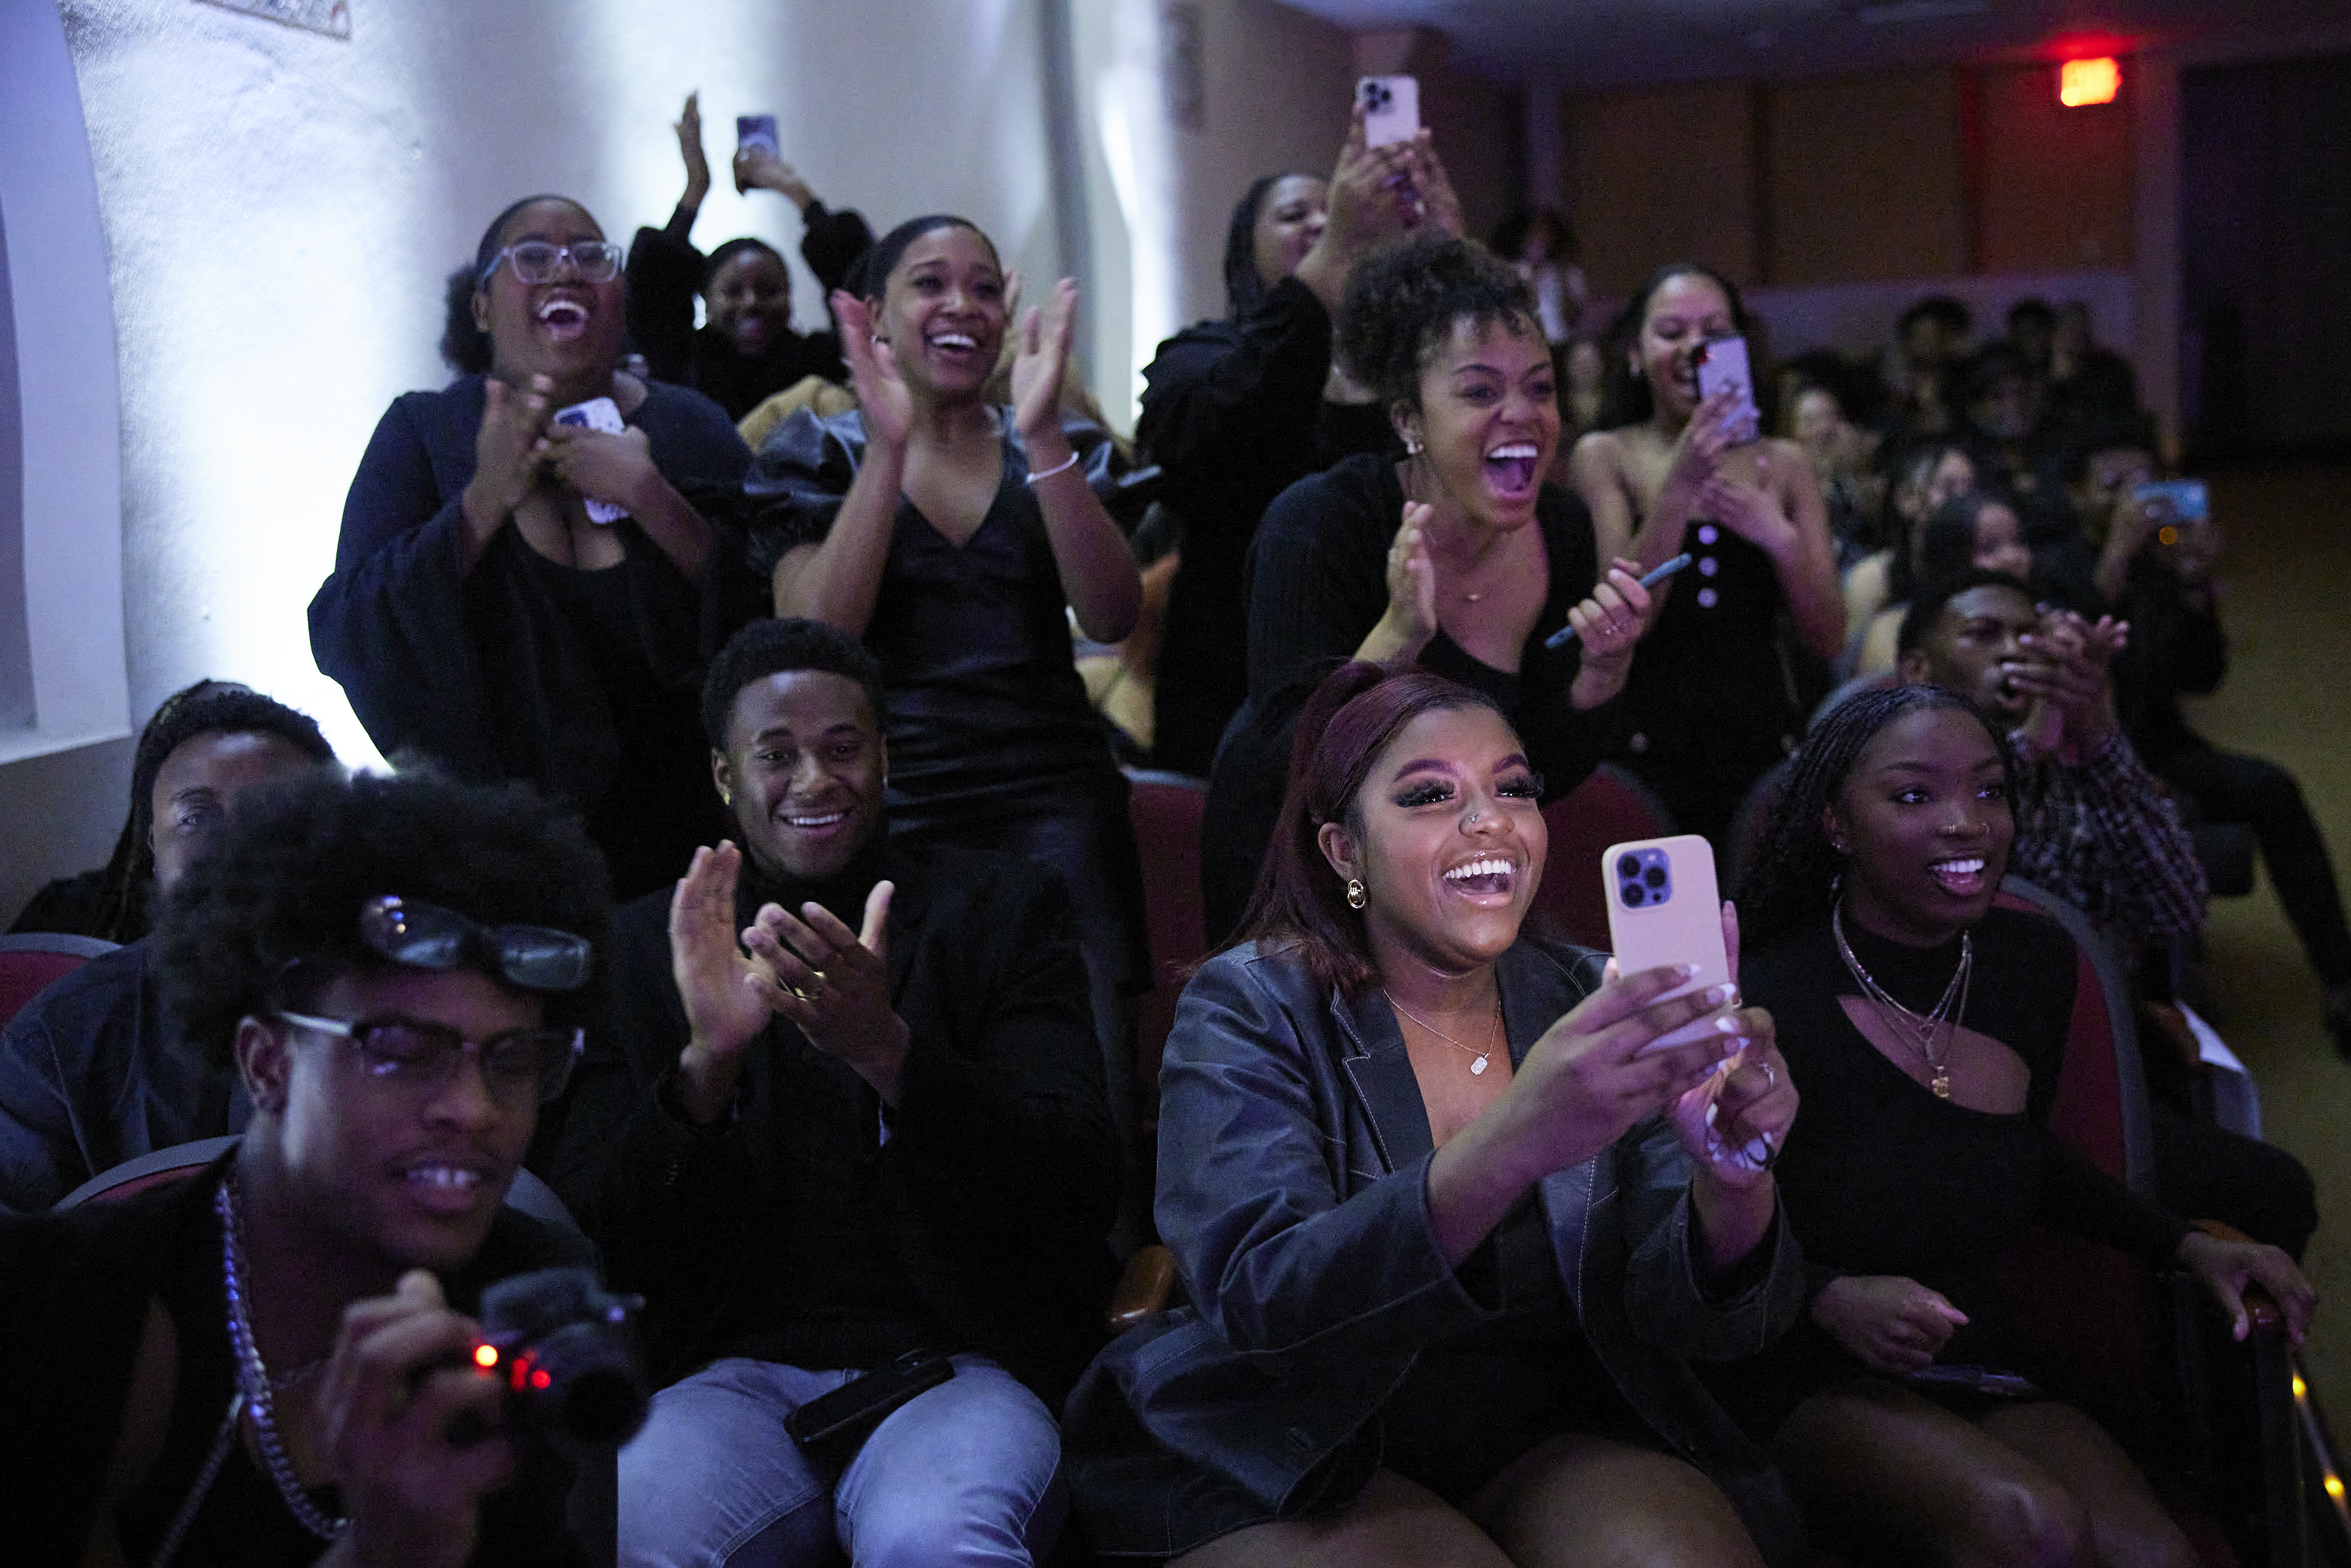 Students cheering and taking photos of a friend during the OU Black Royalty Pageant.